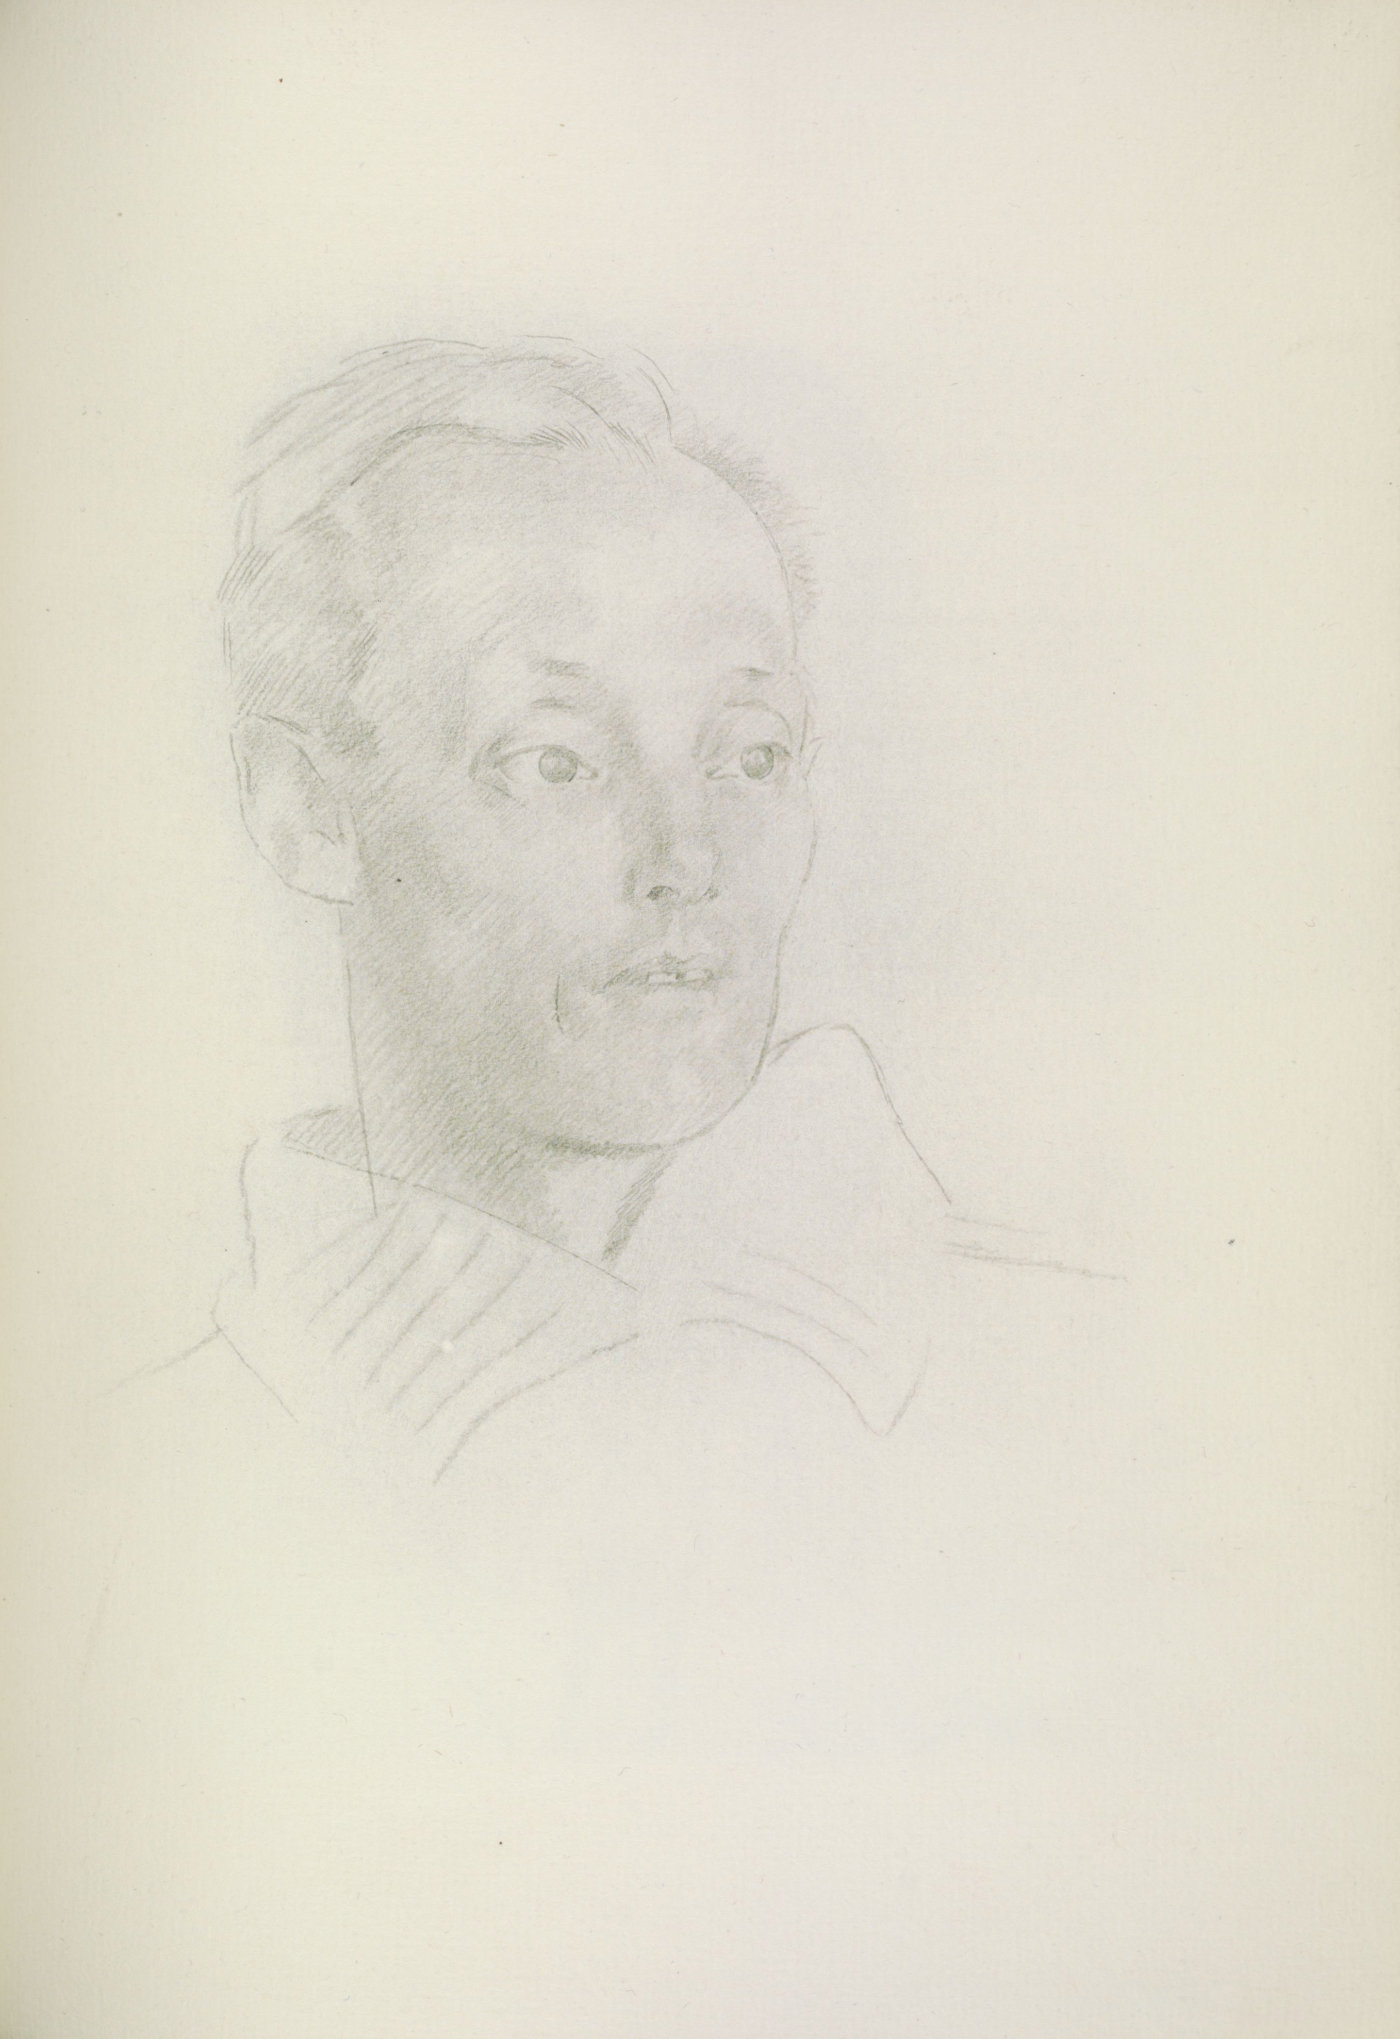 Pencil head portrait of a clean-shaven white male with medium-length hair balding in front, dark eyes, facing to his left.